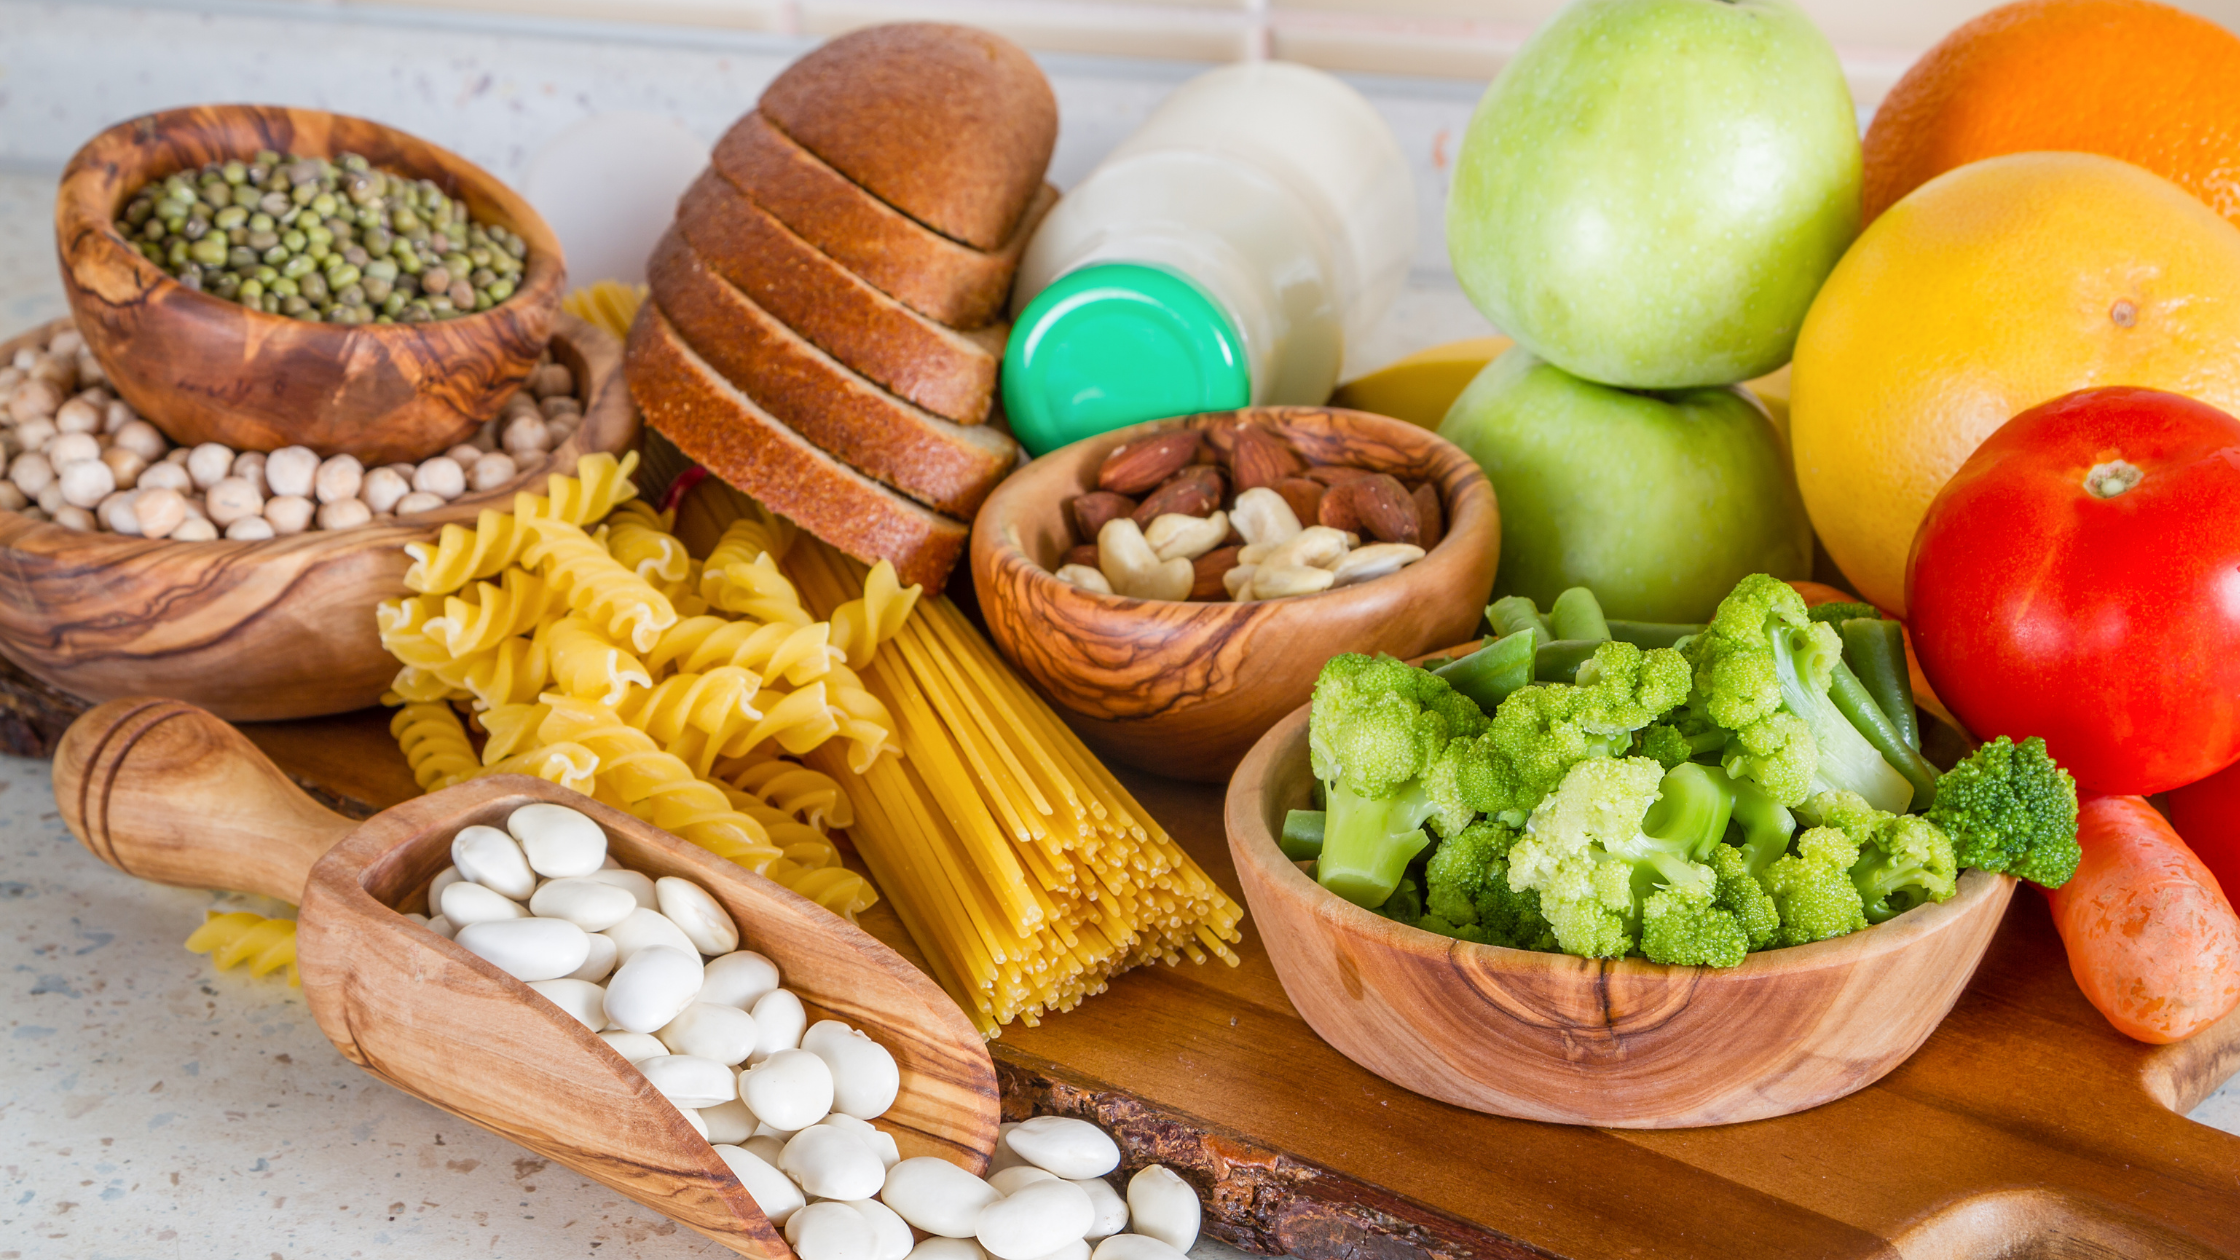 Image of selection of vegetarian foods on a wooden platter on a table. Foods include bread, pulses, pasta, fruit, veg and nuts